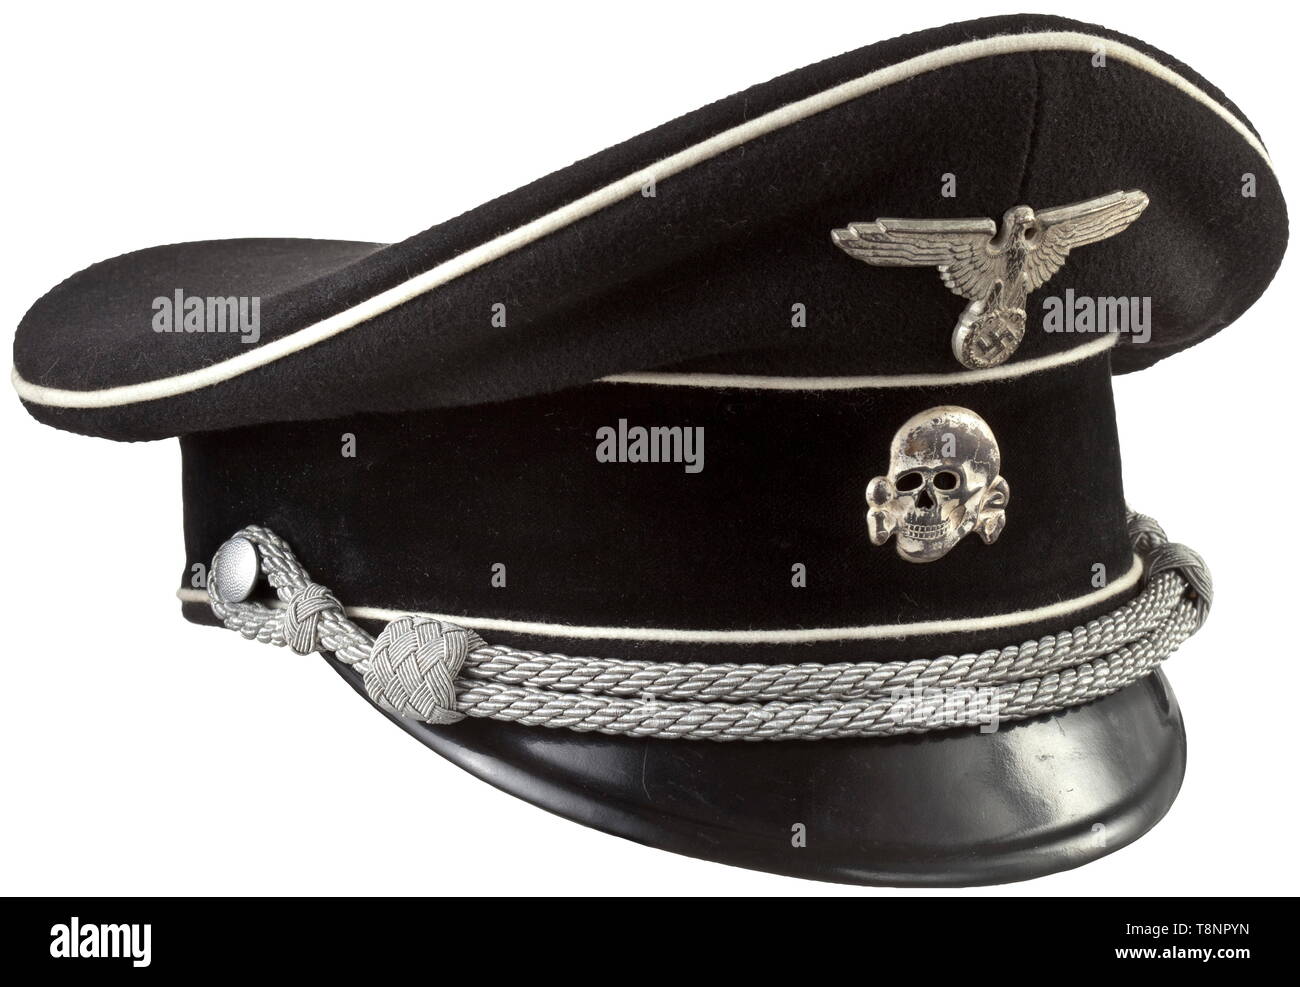 A visor cap for leaders of the Allgemeine-SS Made from fine black cloth, cap band of black velvet, white piping, silver-plated cupal insignia, silver cap cording. Black inner lining, a cloth tag beneath the cap trapezoid 'Vom Reichsführer SS befohlene Ausführung SS RZM'. Brown leather sweatband, the visor with RZM-SS ink stamping. Near mint condition. historic, historical, 20th century, 1930s, 1940s, Waffen-SS, armed division of the SS, armed service, armed services, NS, National Socialism, Nazism, Third Reich, German Reich, Germany, military, militaria, utensil, piece of e, Editorial-Use-Only Stock Photo